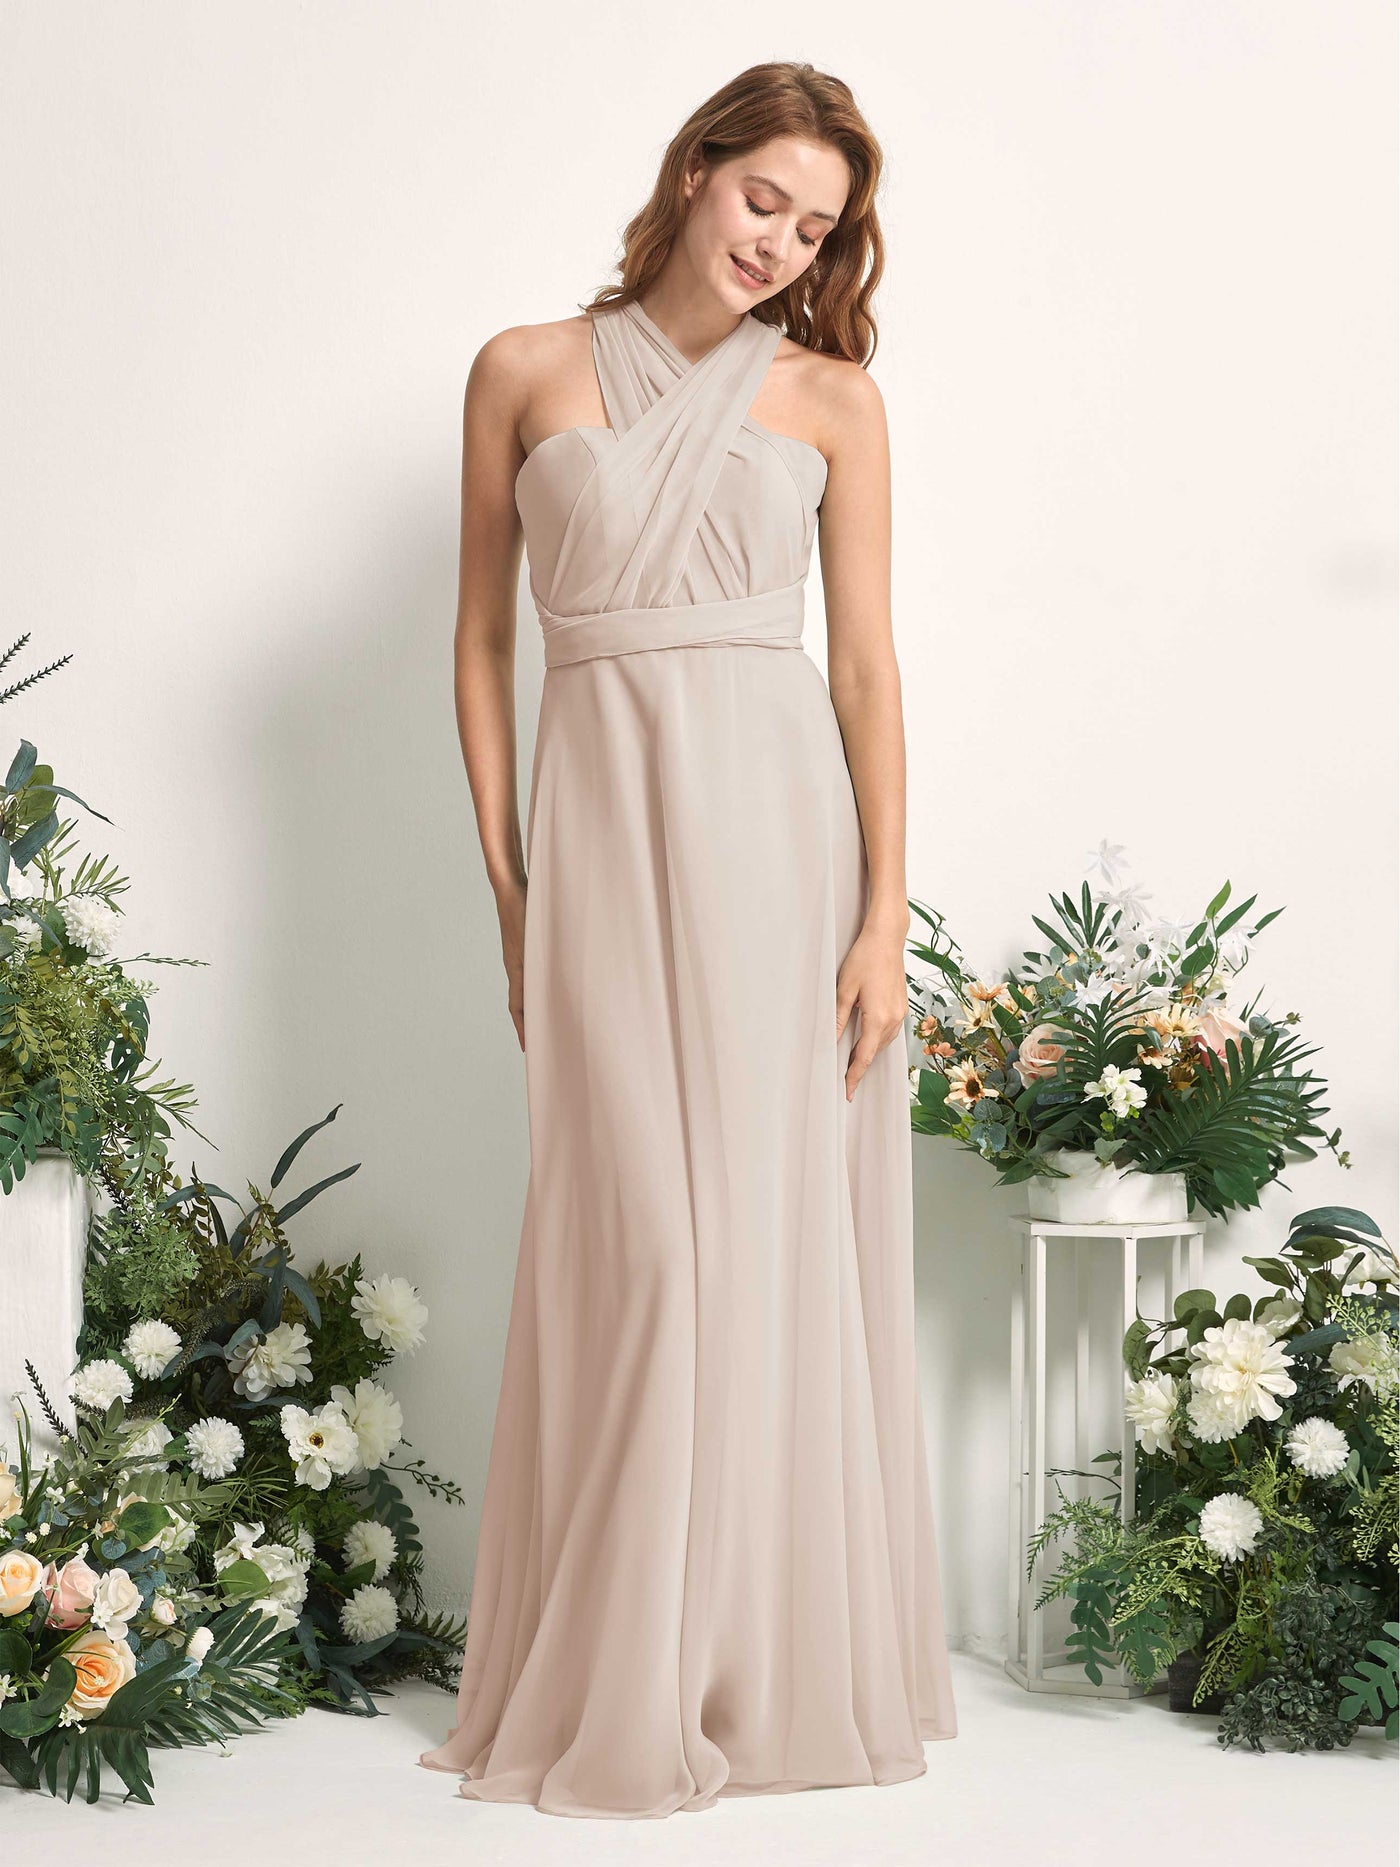 Bridesmaid Dress A-line Chiffon Halter Full Length Short Sleeves Wedding Party Dress - Champagne (81226316)#color_champagne